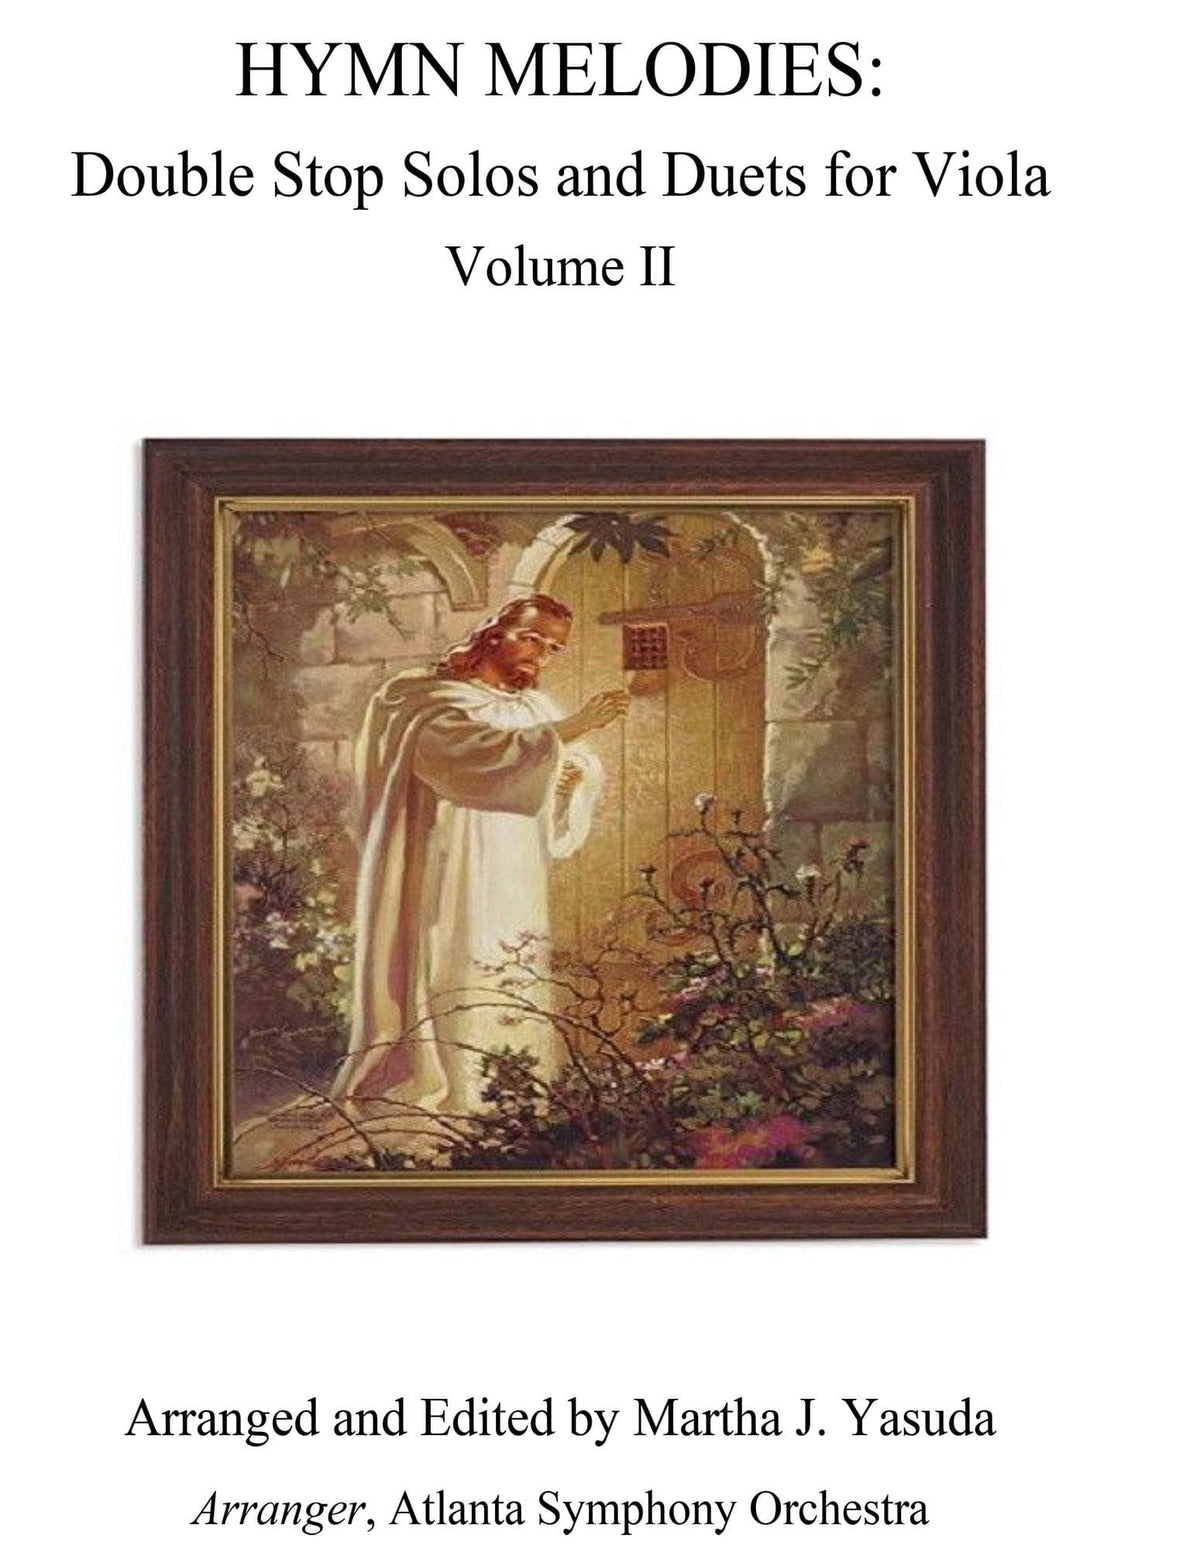 Yasuda, Martha - Hymn Melodies: Double Stop Solos and Duets For Viola, Volume II - Digital Download